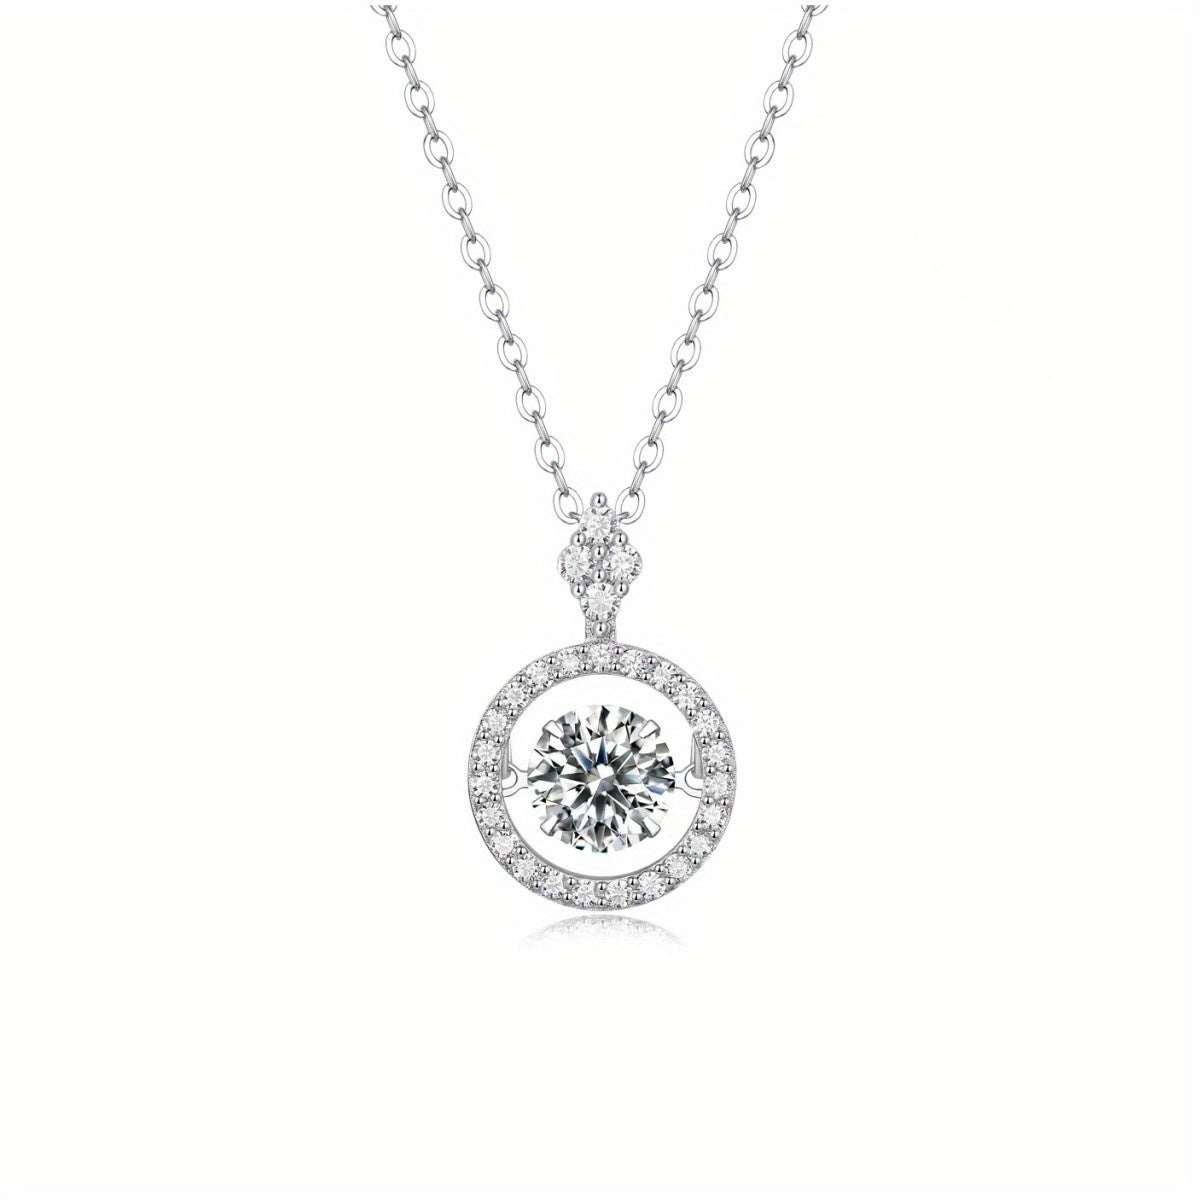 Adjustable Moissanite Pendant Necklace - Stunning 925 Silver Jewelry for Women & Girls - Perfect Gift for Valentine's Day, Mother's Day, Thanksgiving, Anniversary, or Birthday